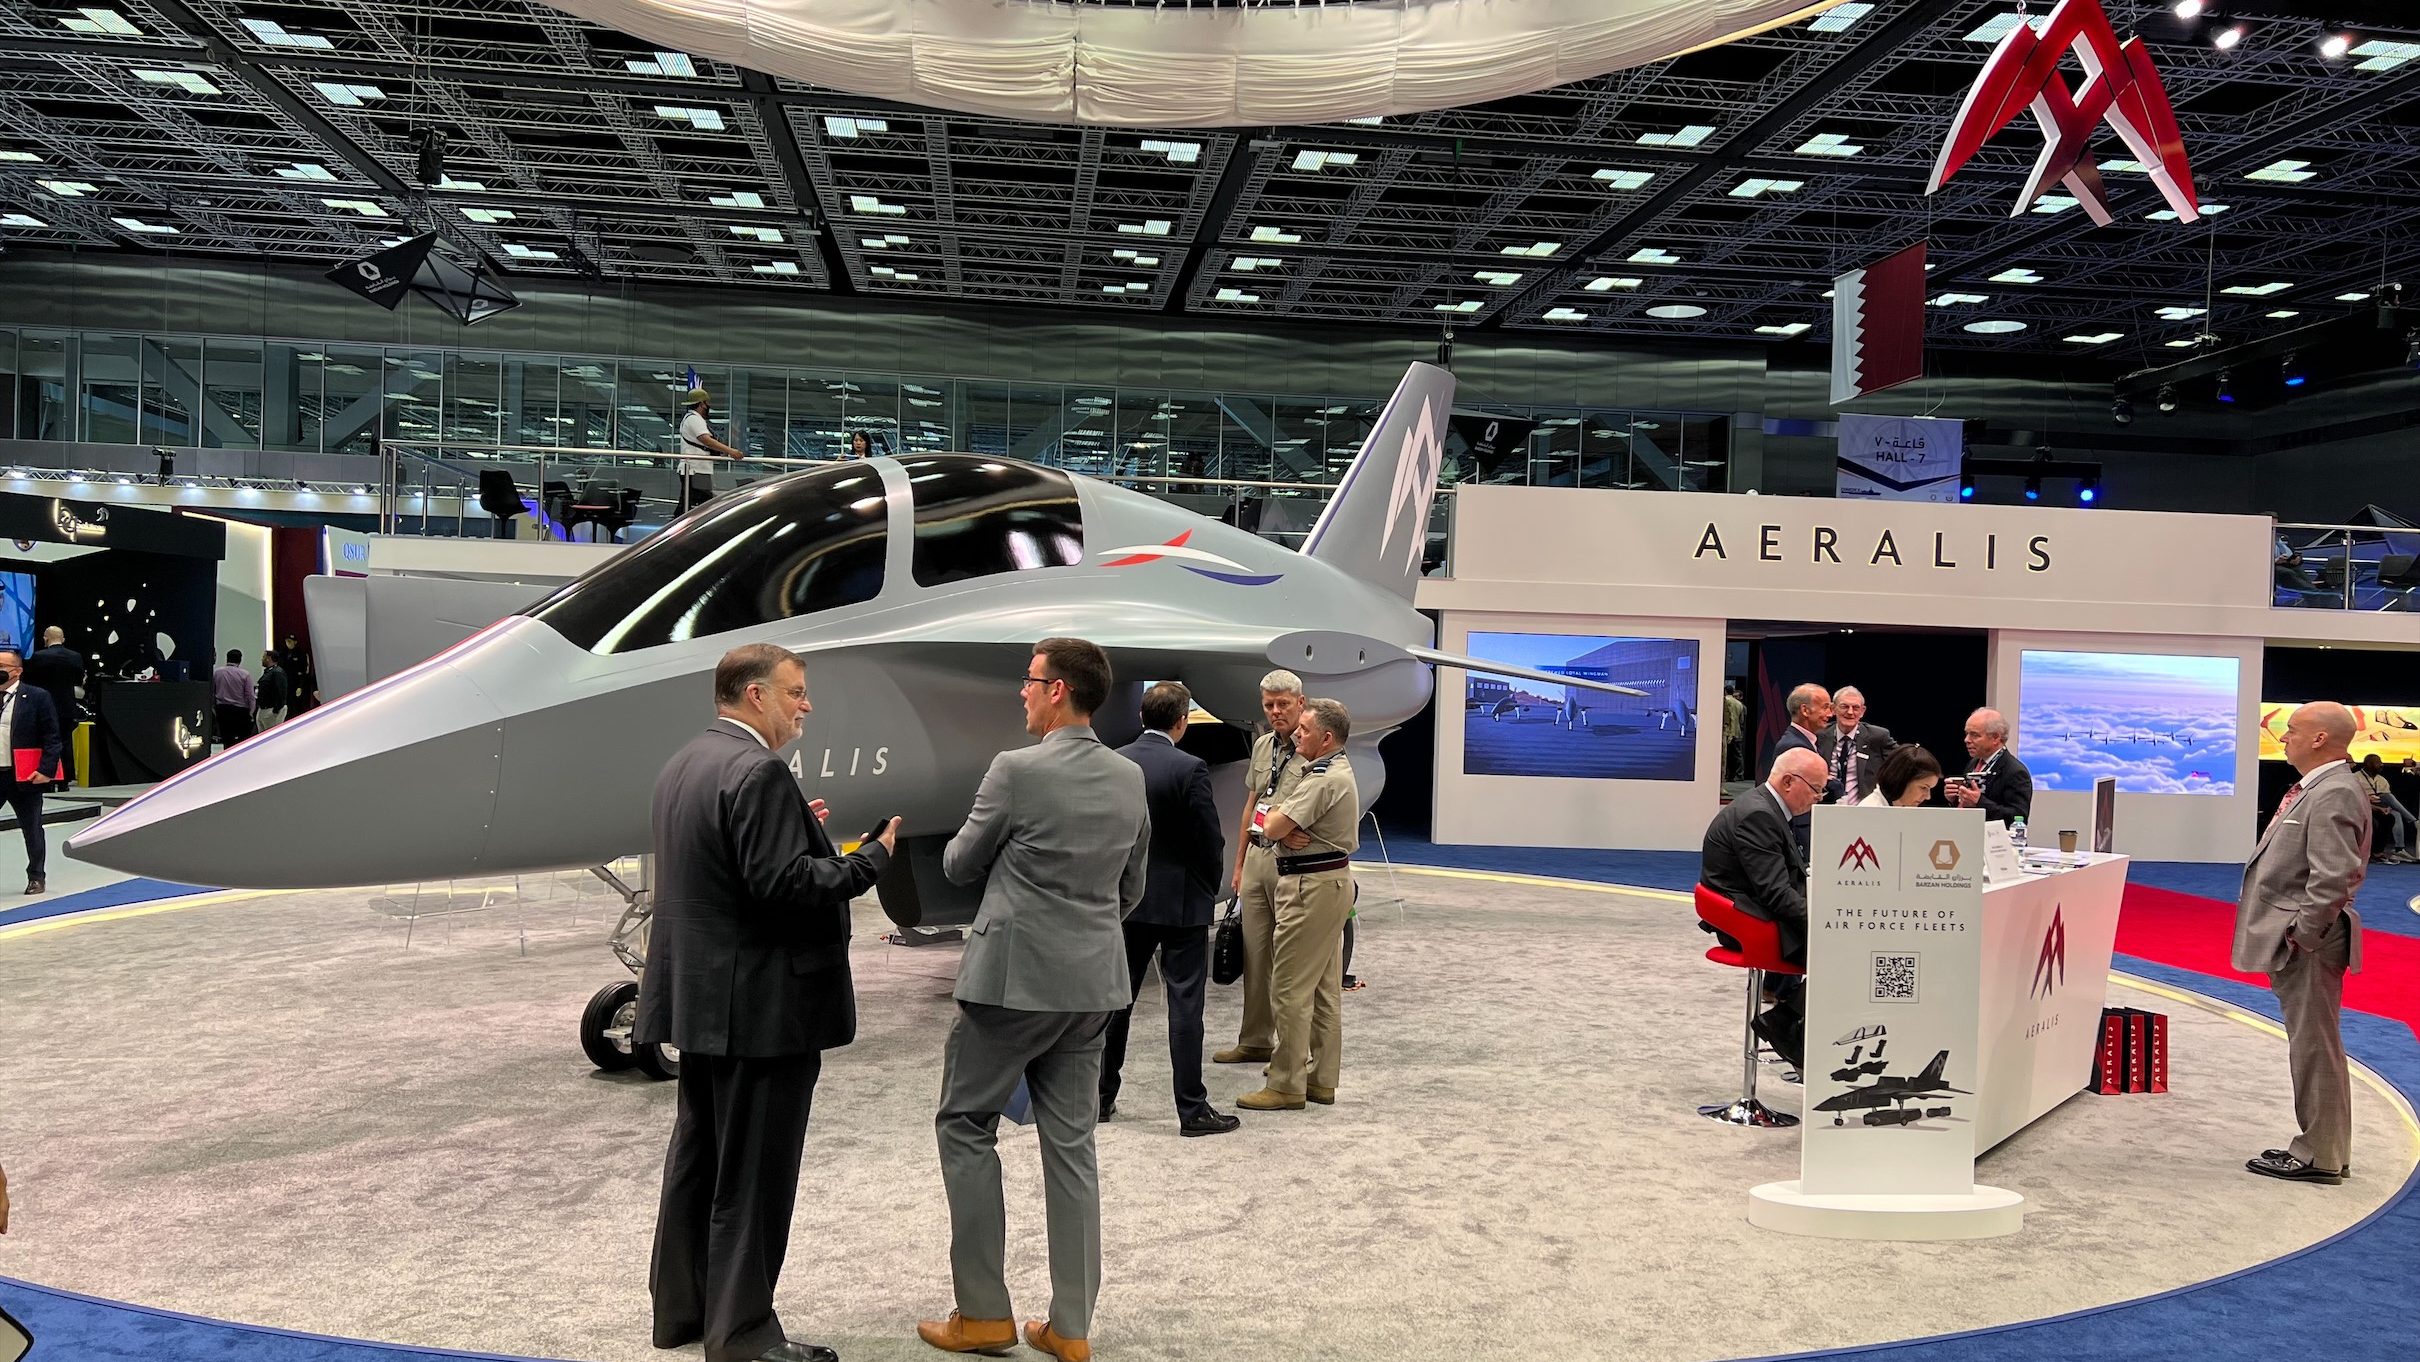 Visitors talk with members of the AERALIS team in front of a grey AERALIS jet